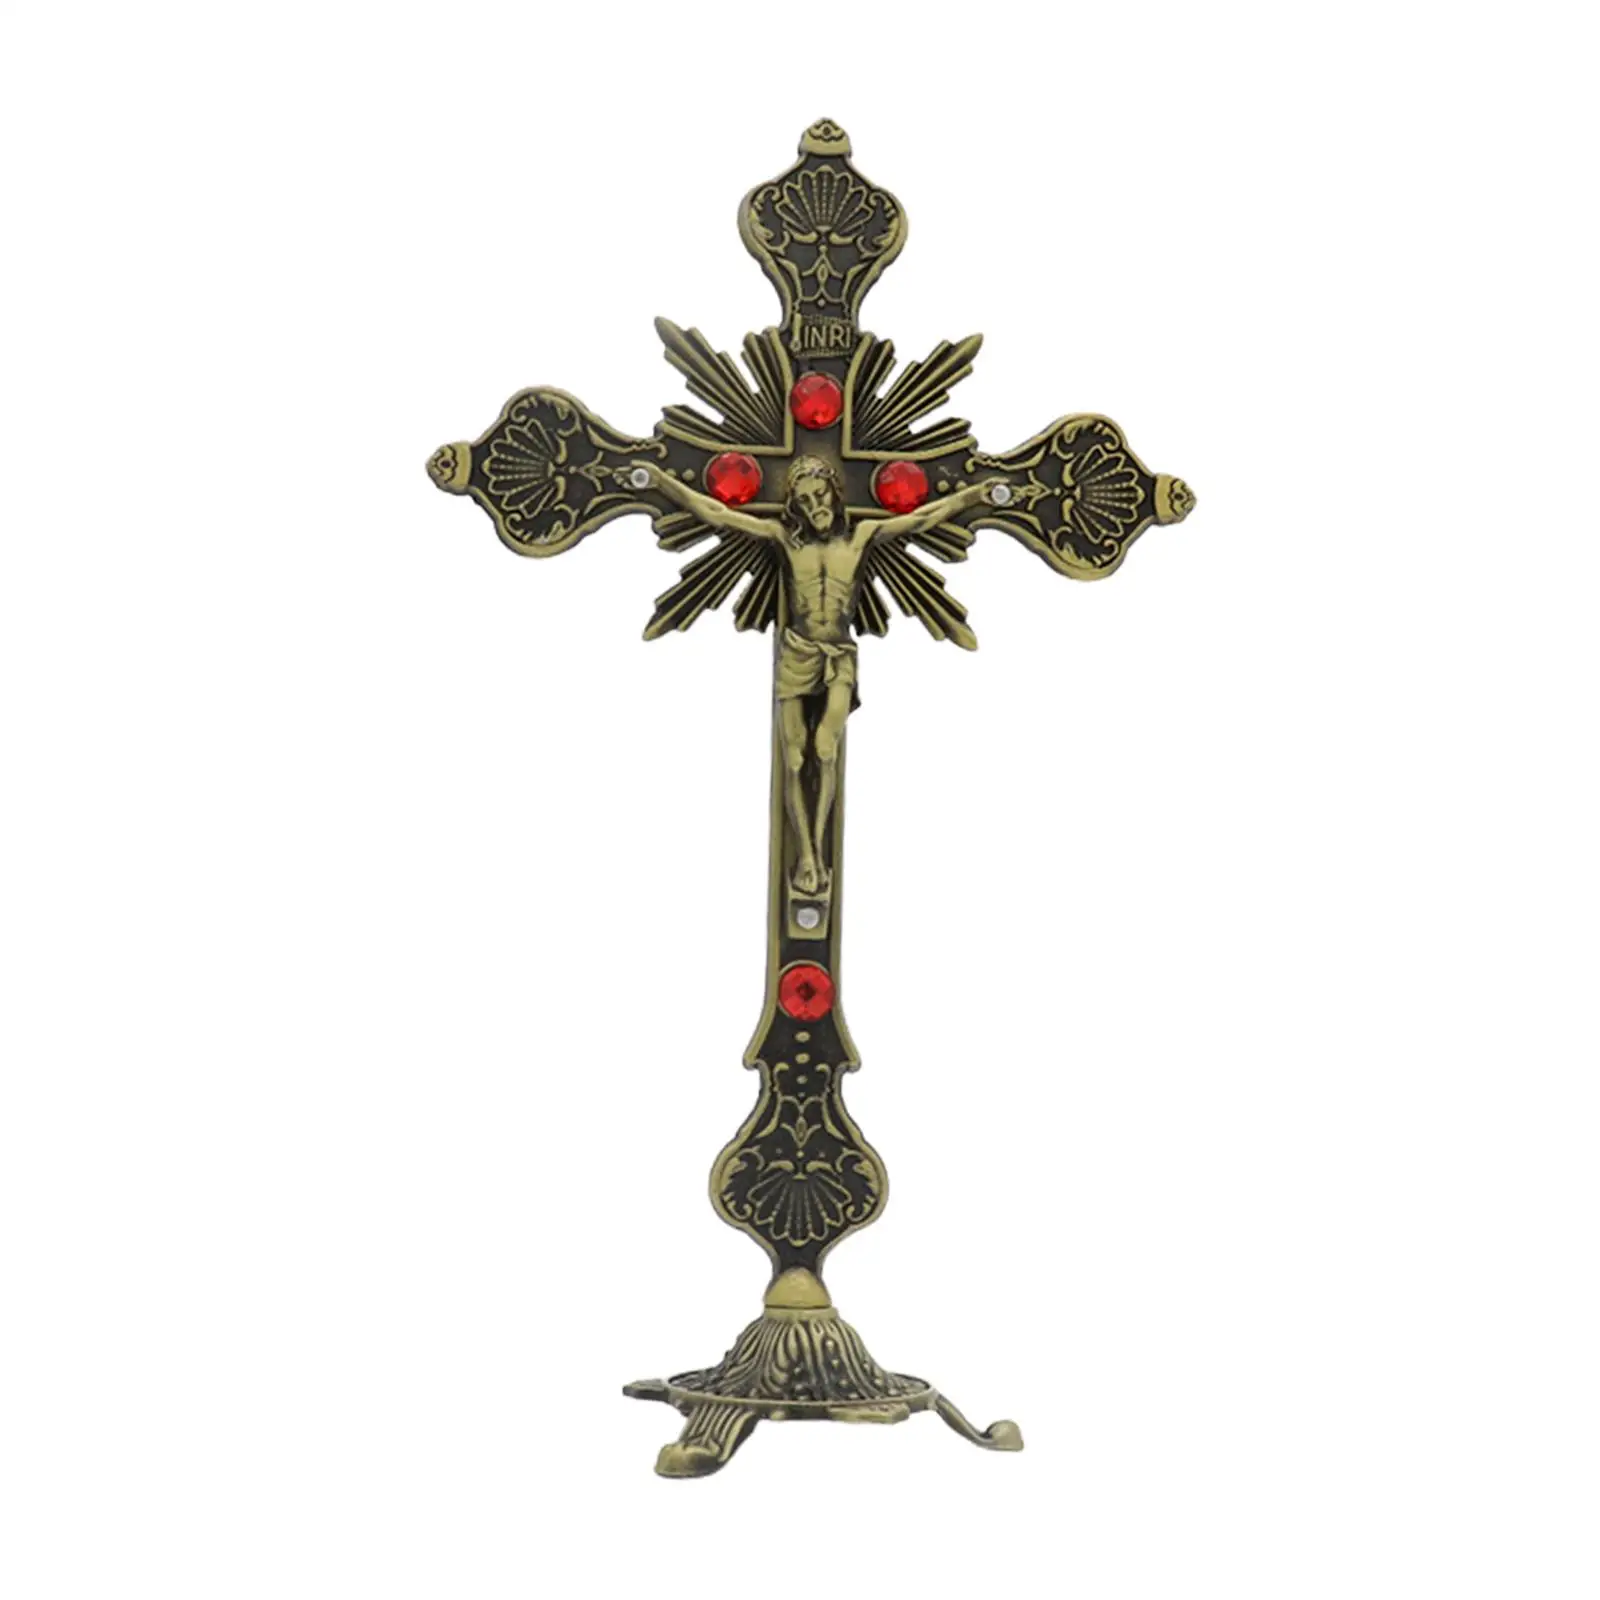 Hanging or Standing Crucifix Crucifix with Stand for Chapel Tabletop Home